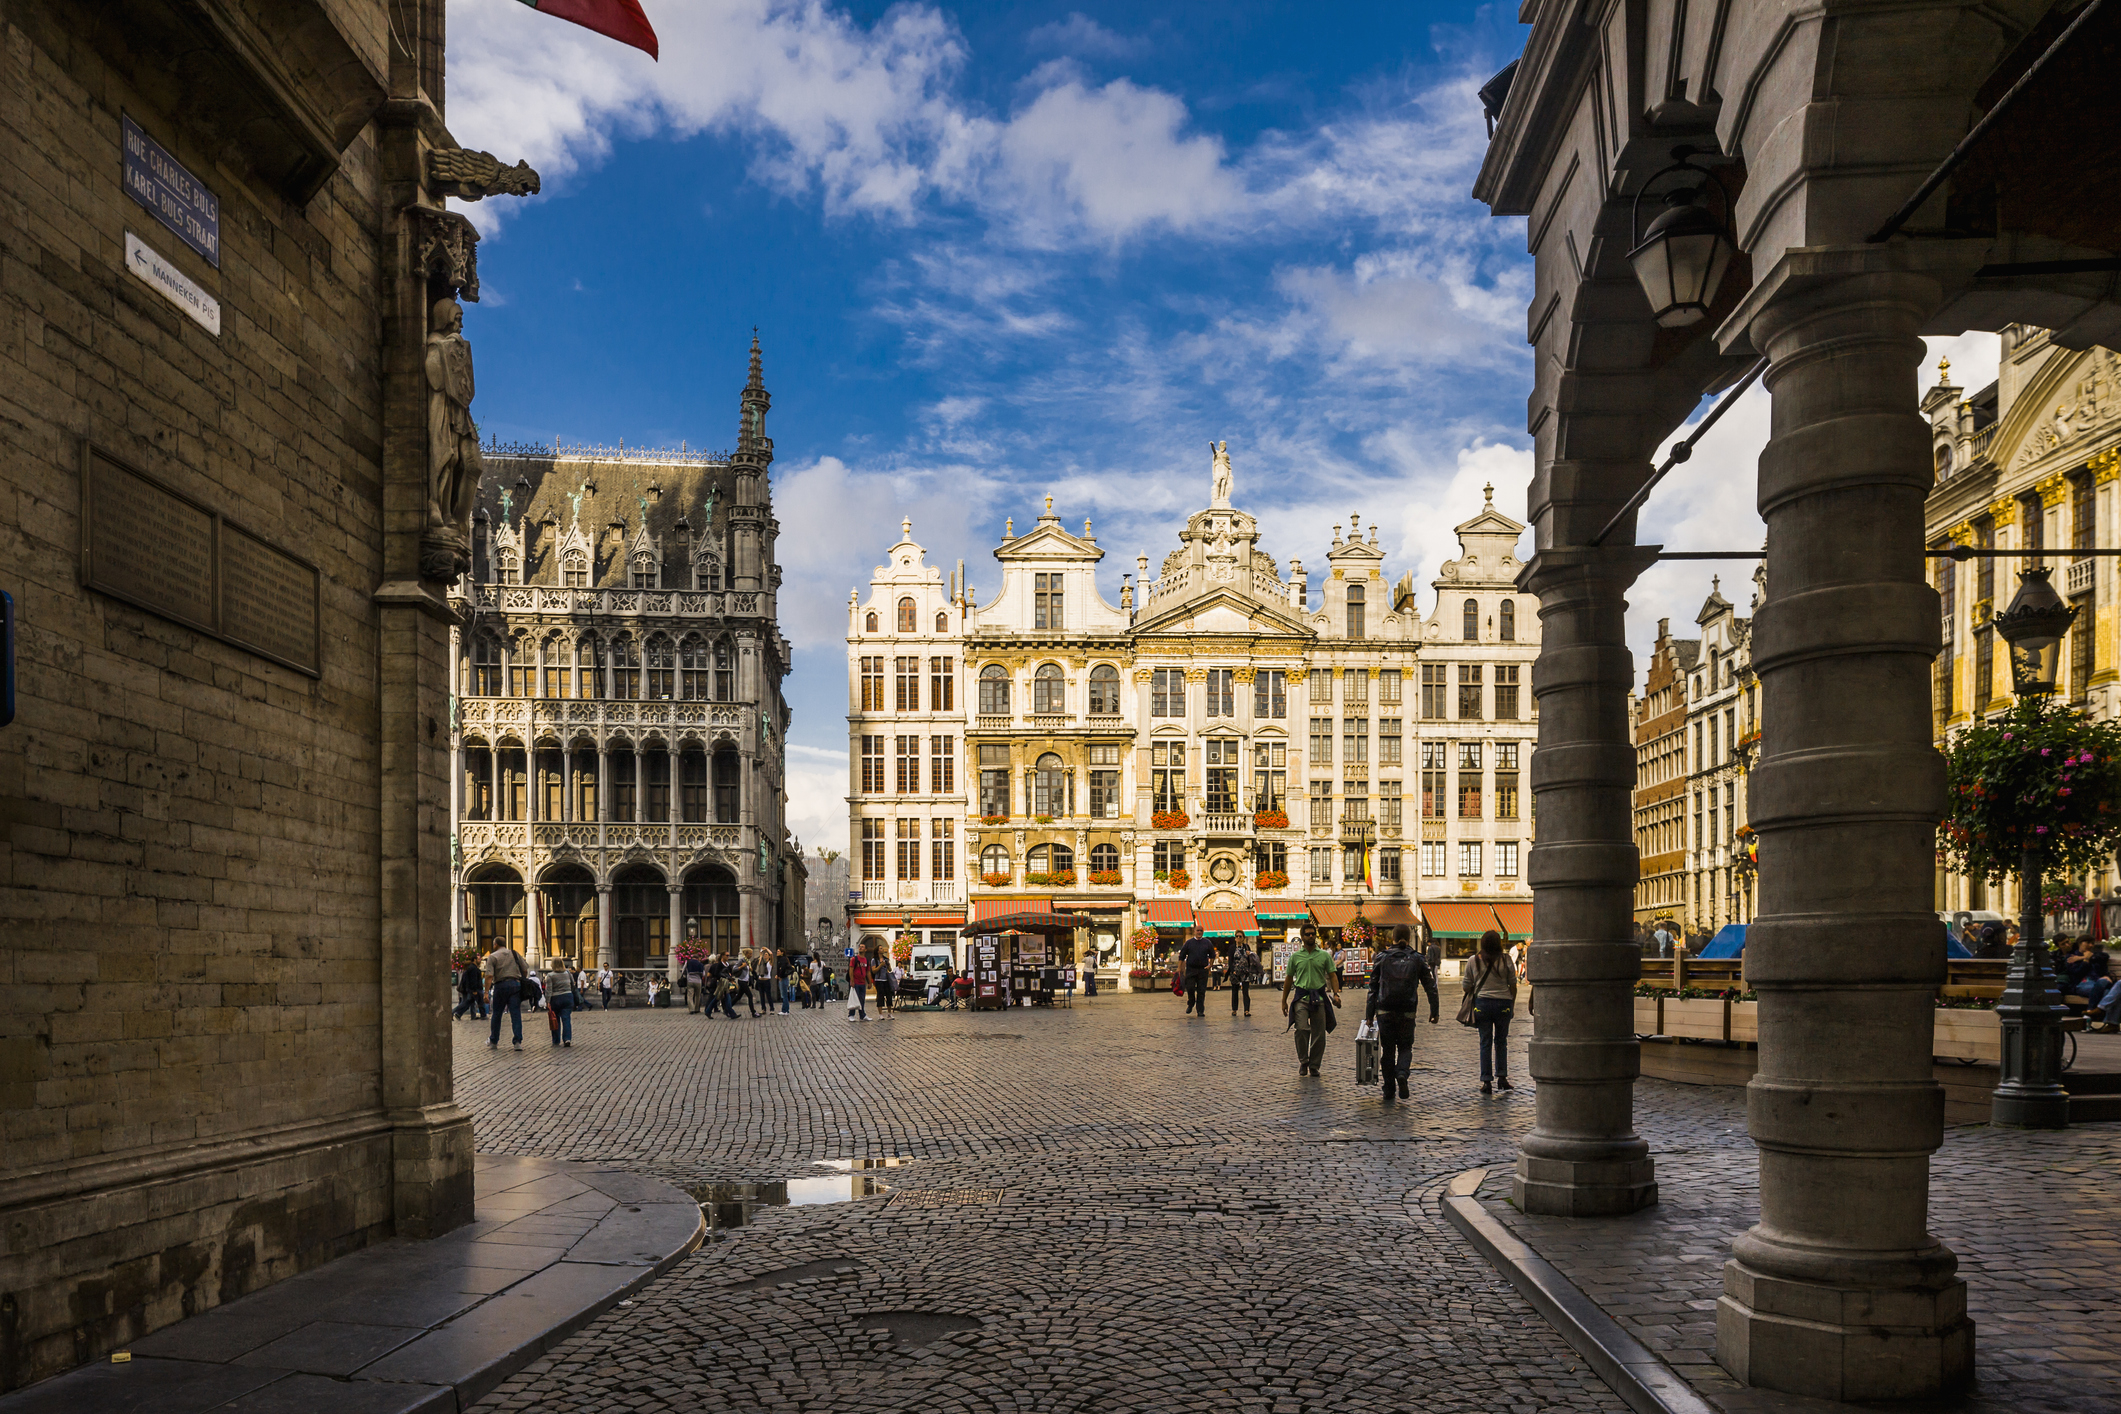 Historic European square lined with ornate buildings and cobblestone streets, bustling with people